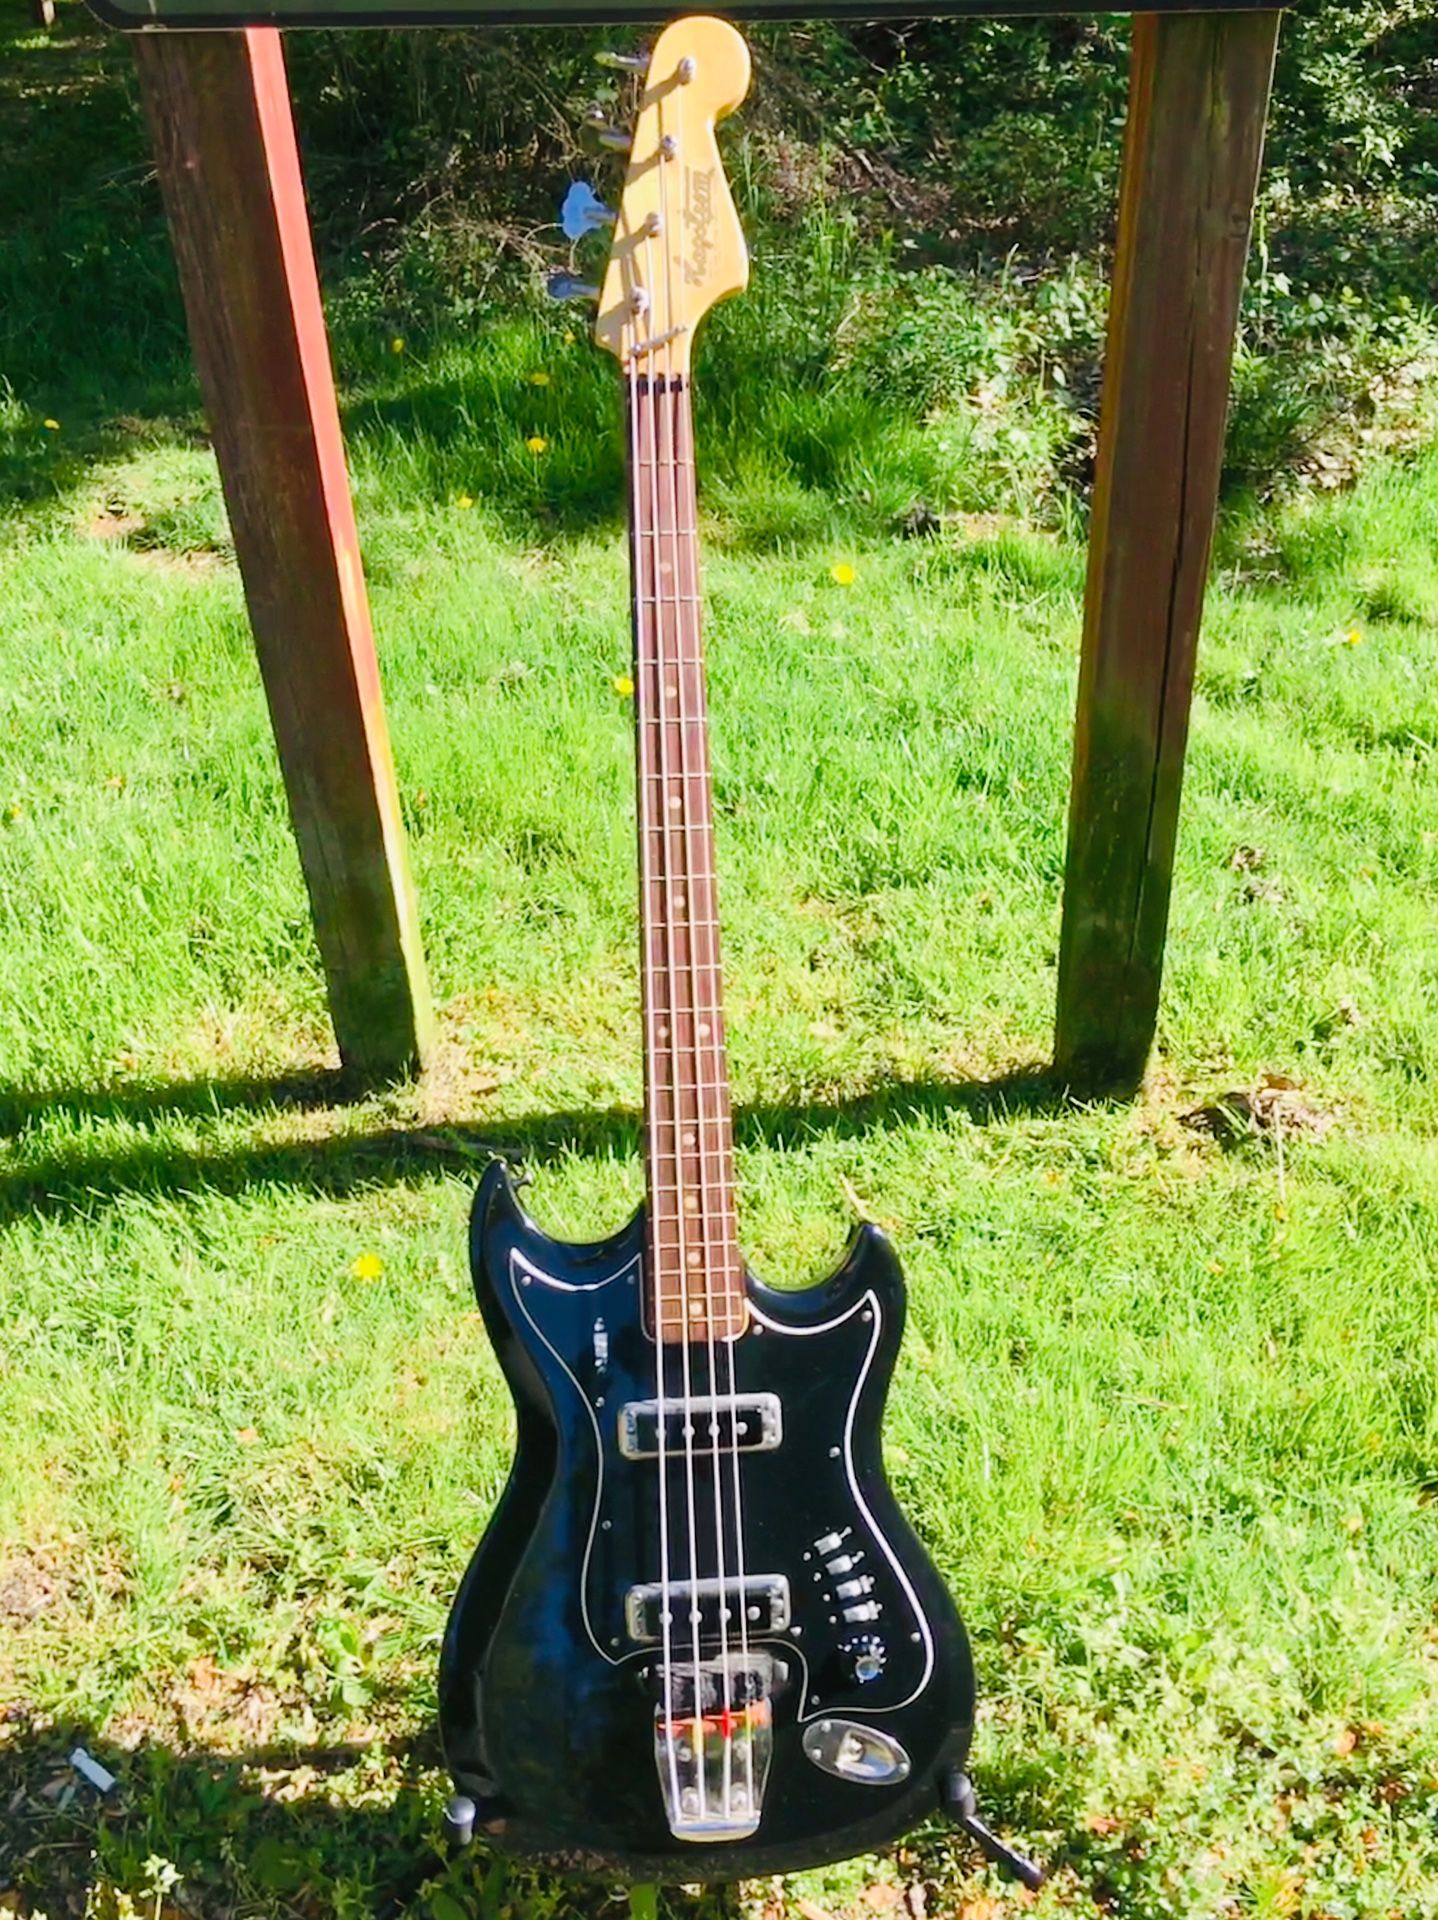 1967 Hagstrom HIIB Vintage Electric Bass Guitar Made in Sweden 🇸🇪